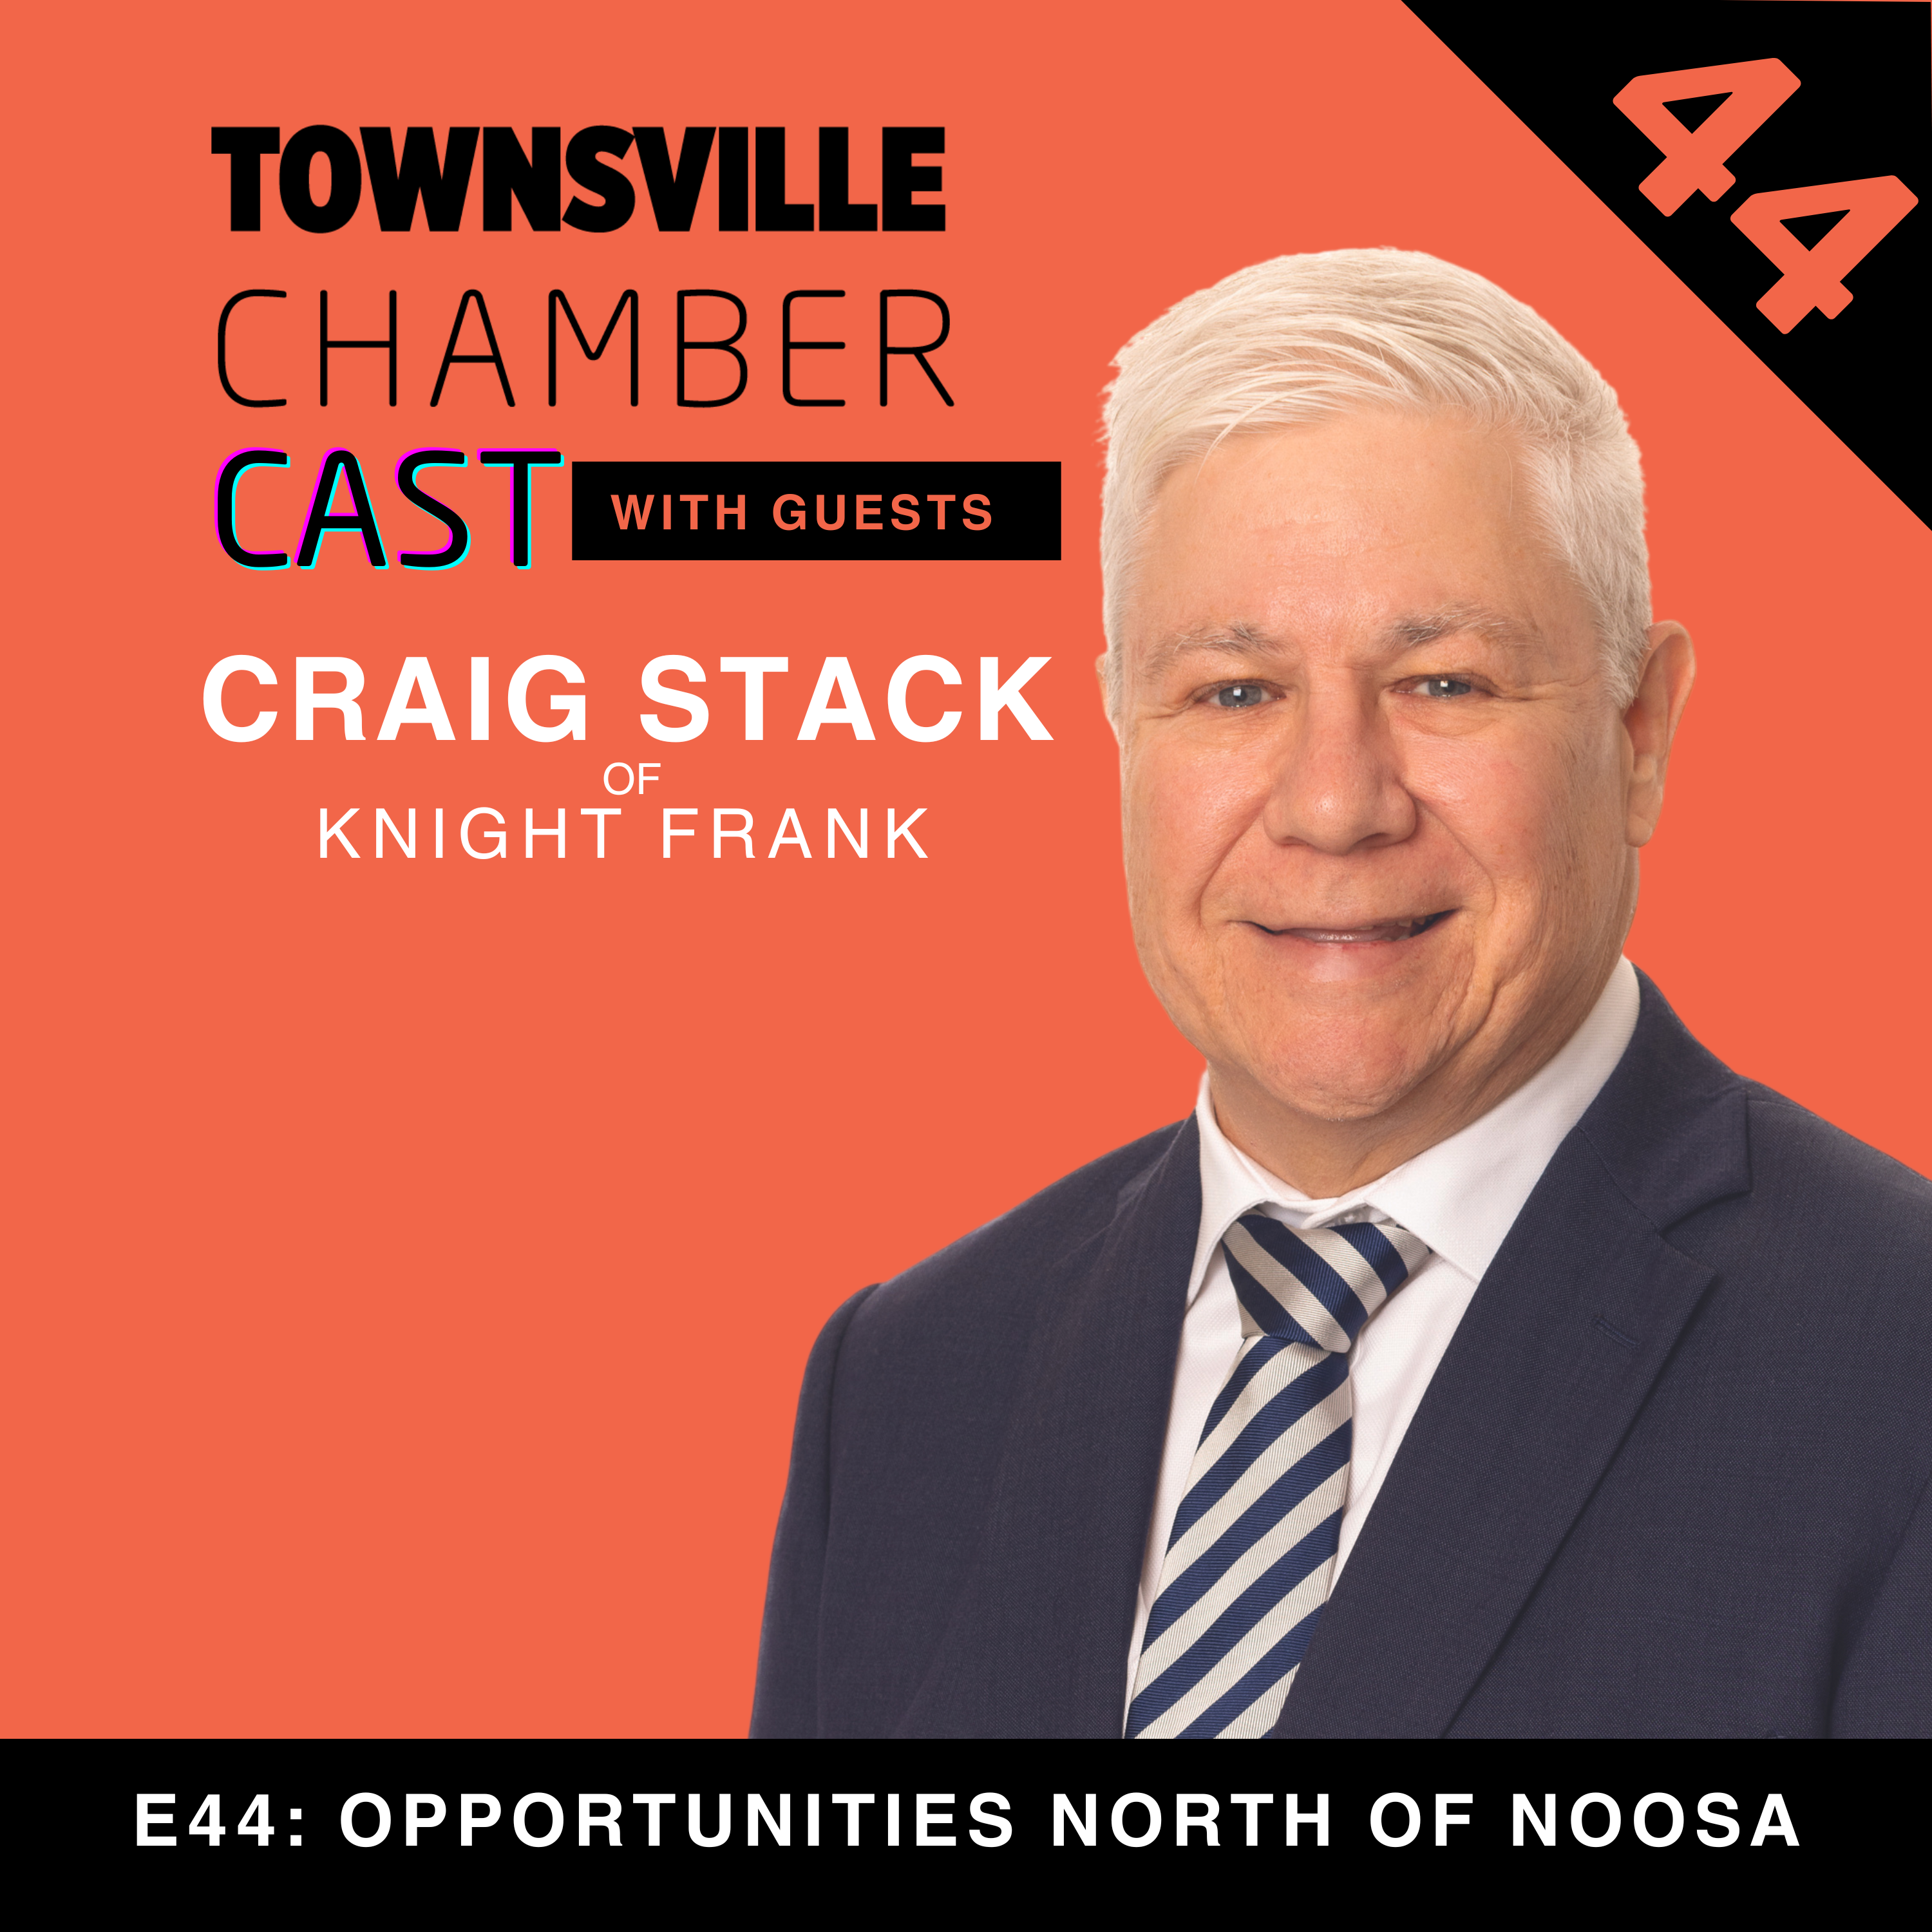 Opportunities and Challenges for Townsville with Craig Stack